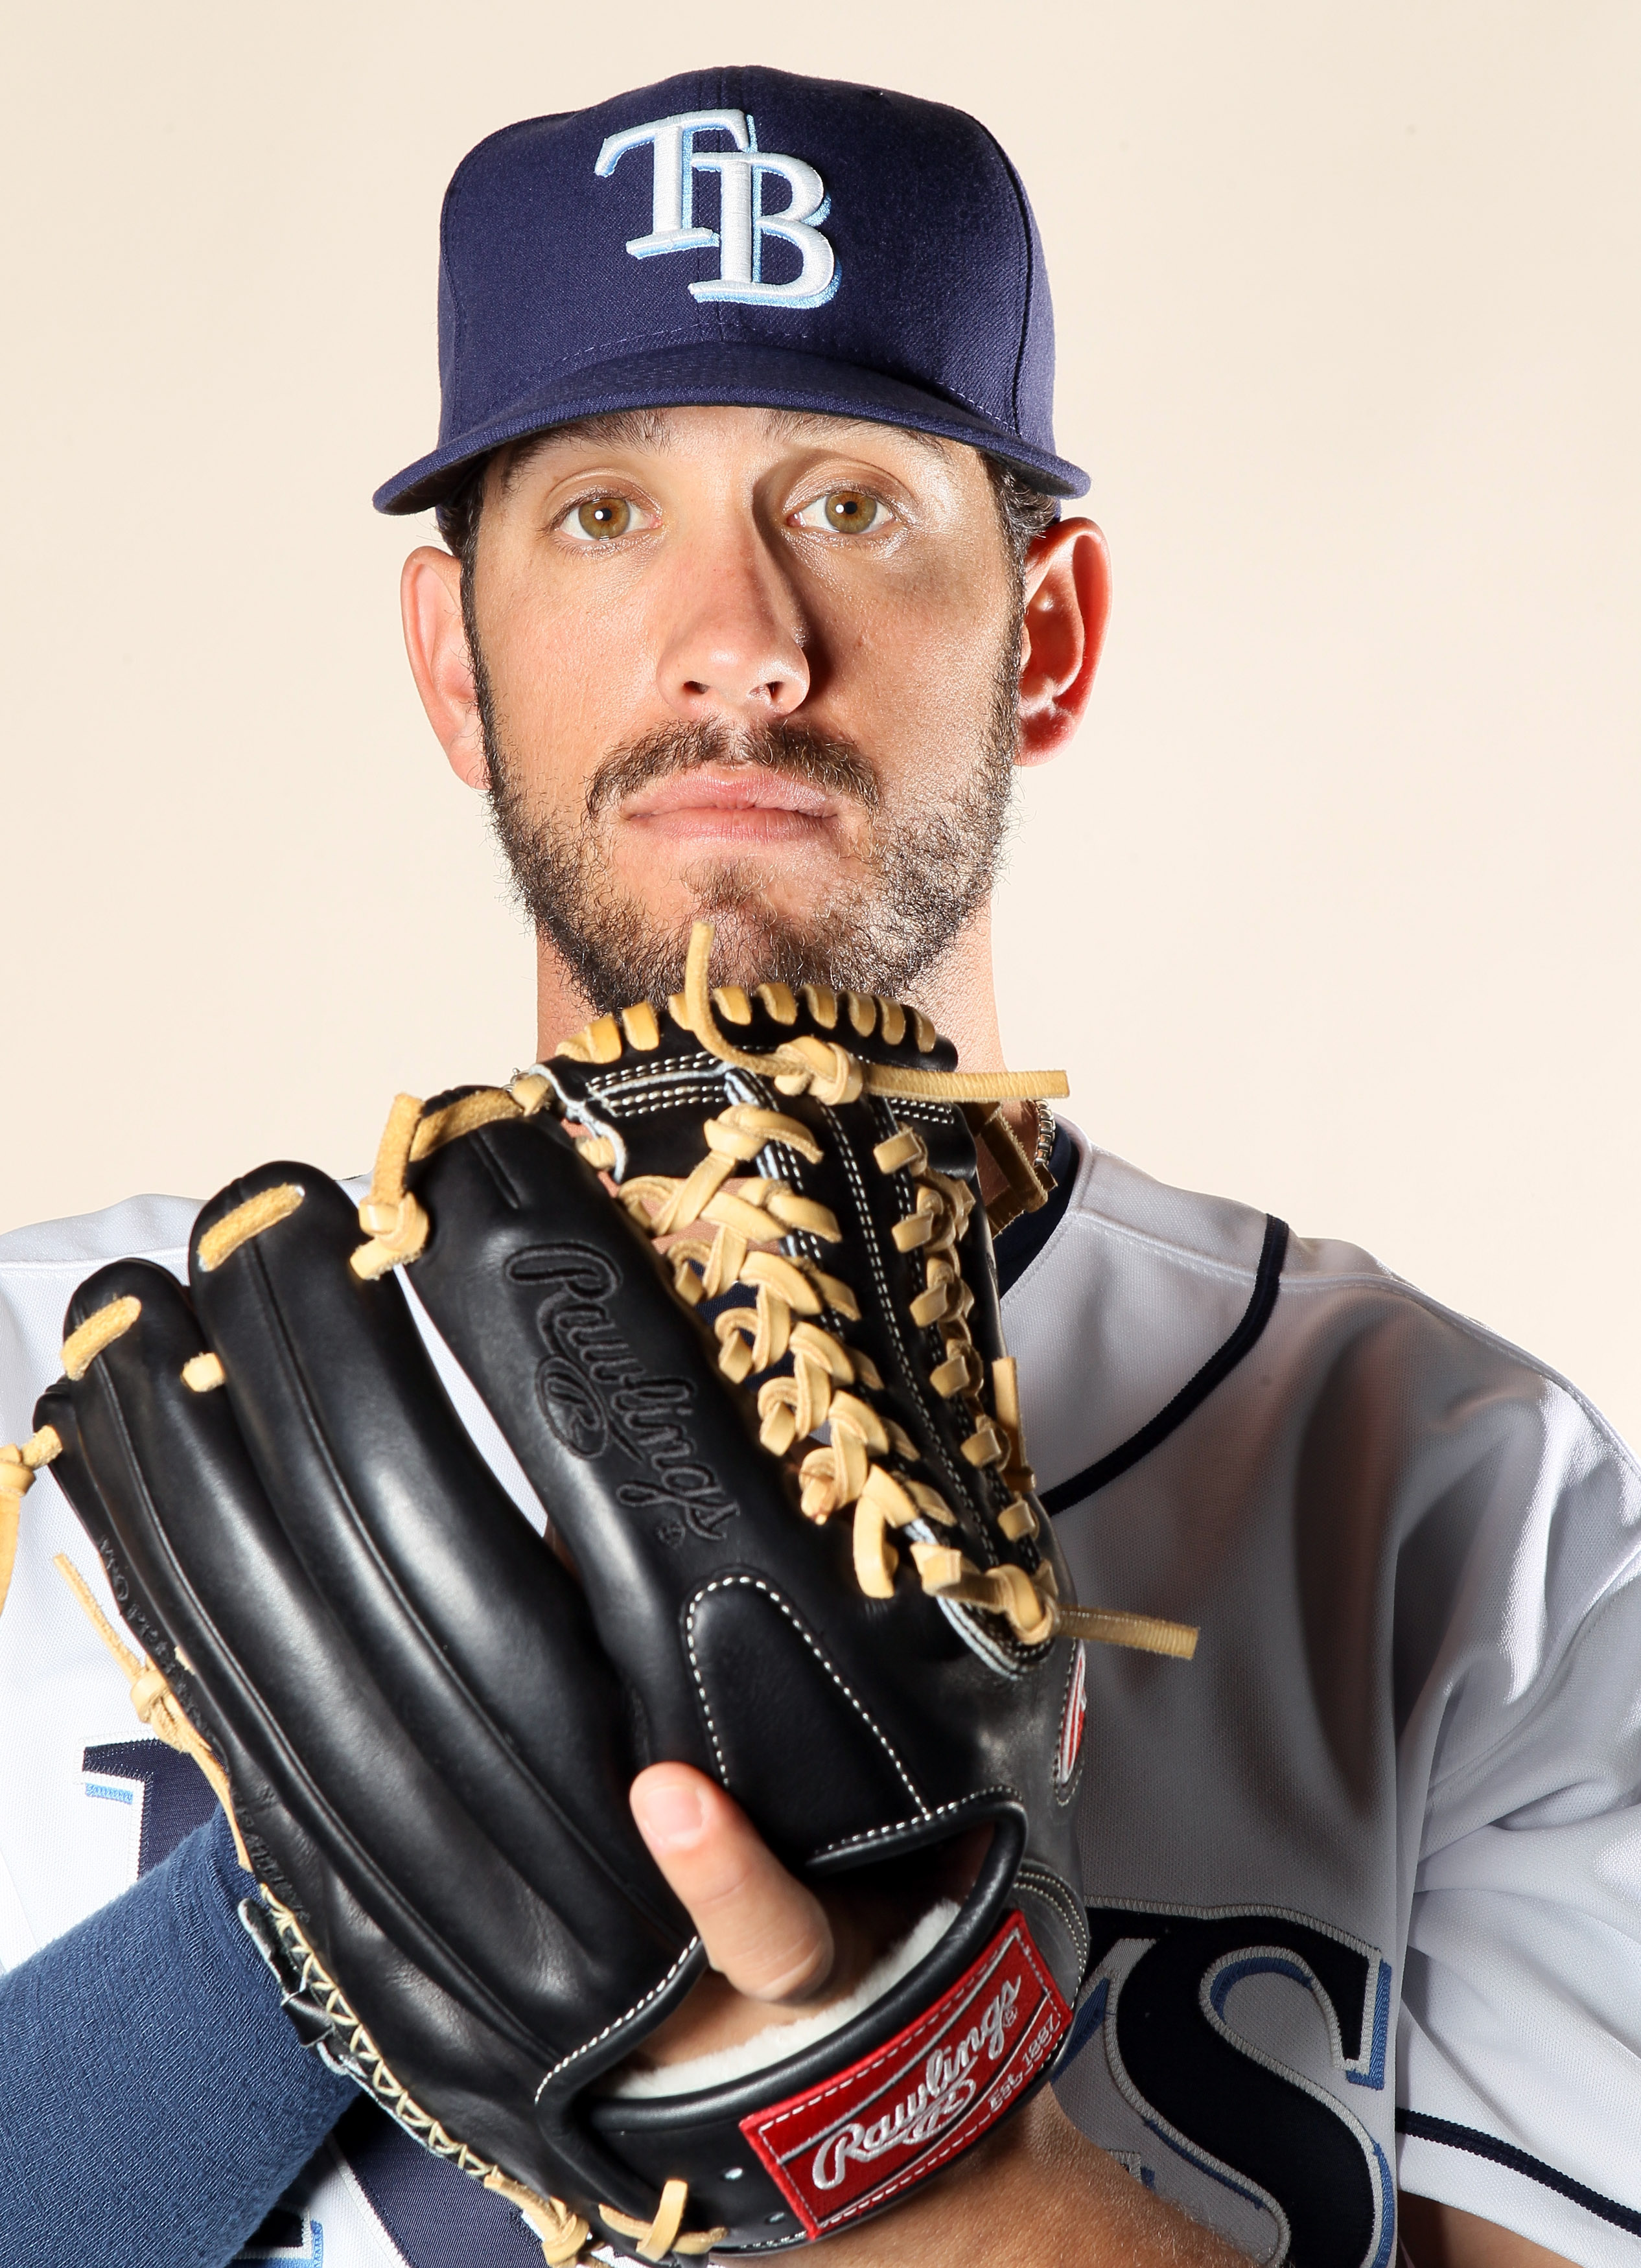 FT. MYERS, FL - FEBRUARY 22:  James Shields #33 of the Tampa Bay Rays poses for a portrait during the Tampa Bay Rays Photo Day on February 22, 2011 at the Charlotte Sports Complex in Port Charlotte, Florida.  (Photo by Elsa/Getty Images)